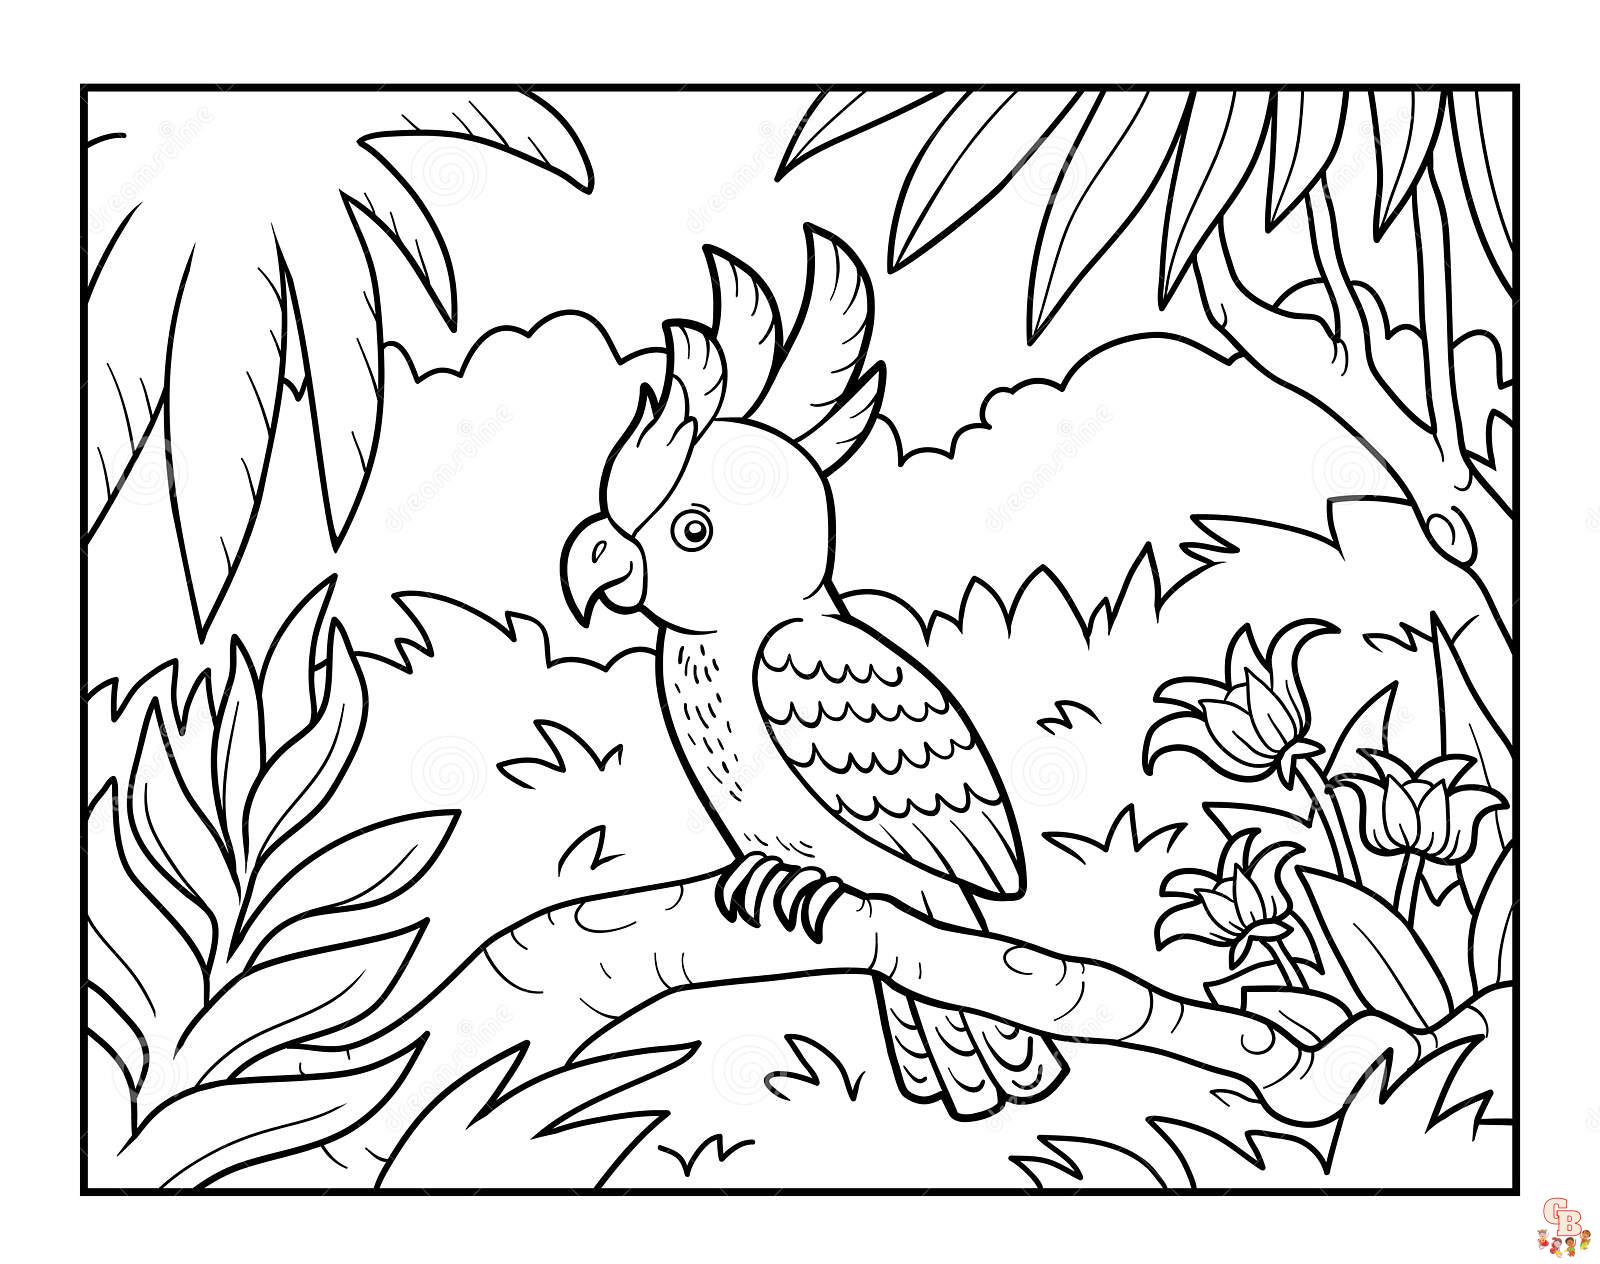 Explore the world of rainforest coloring pages